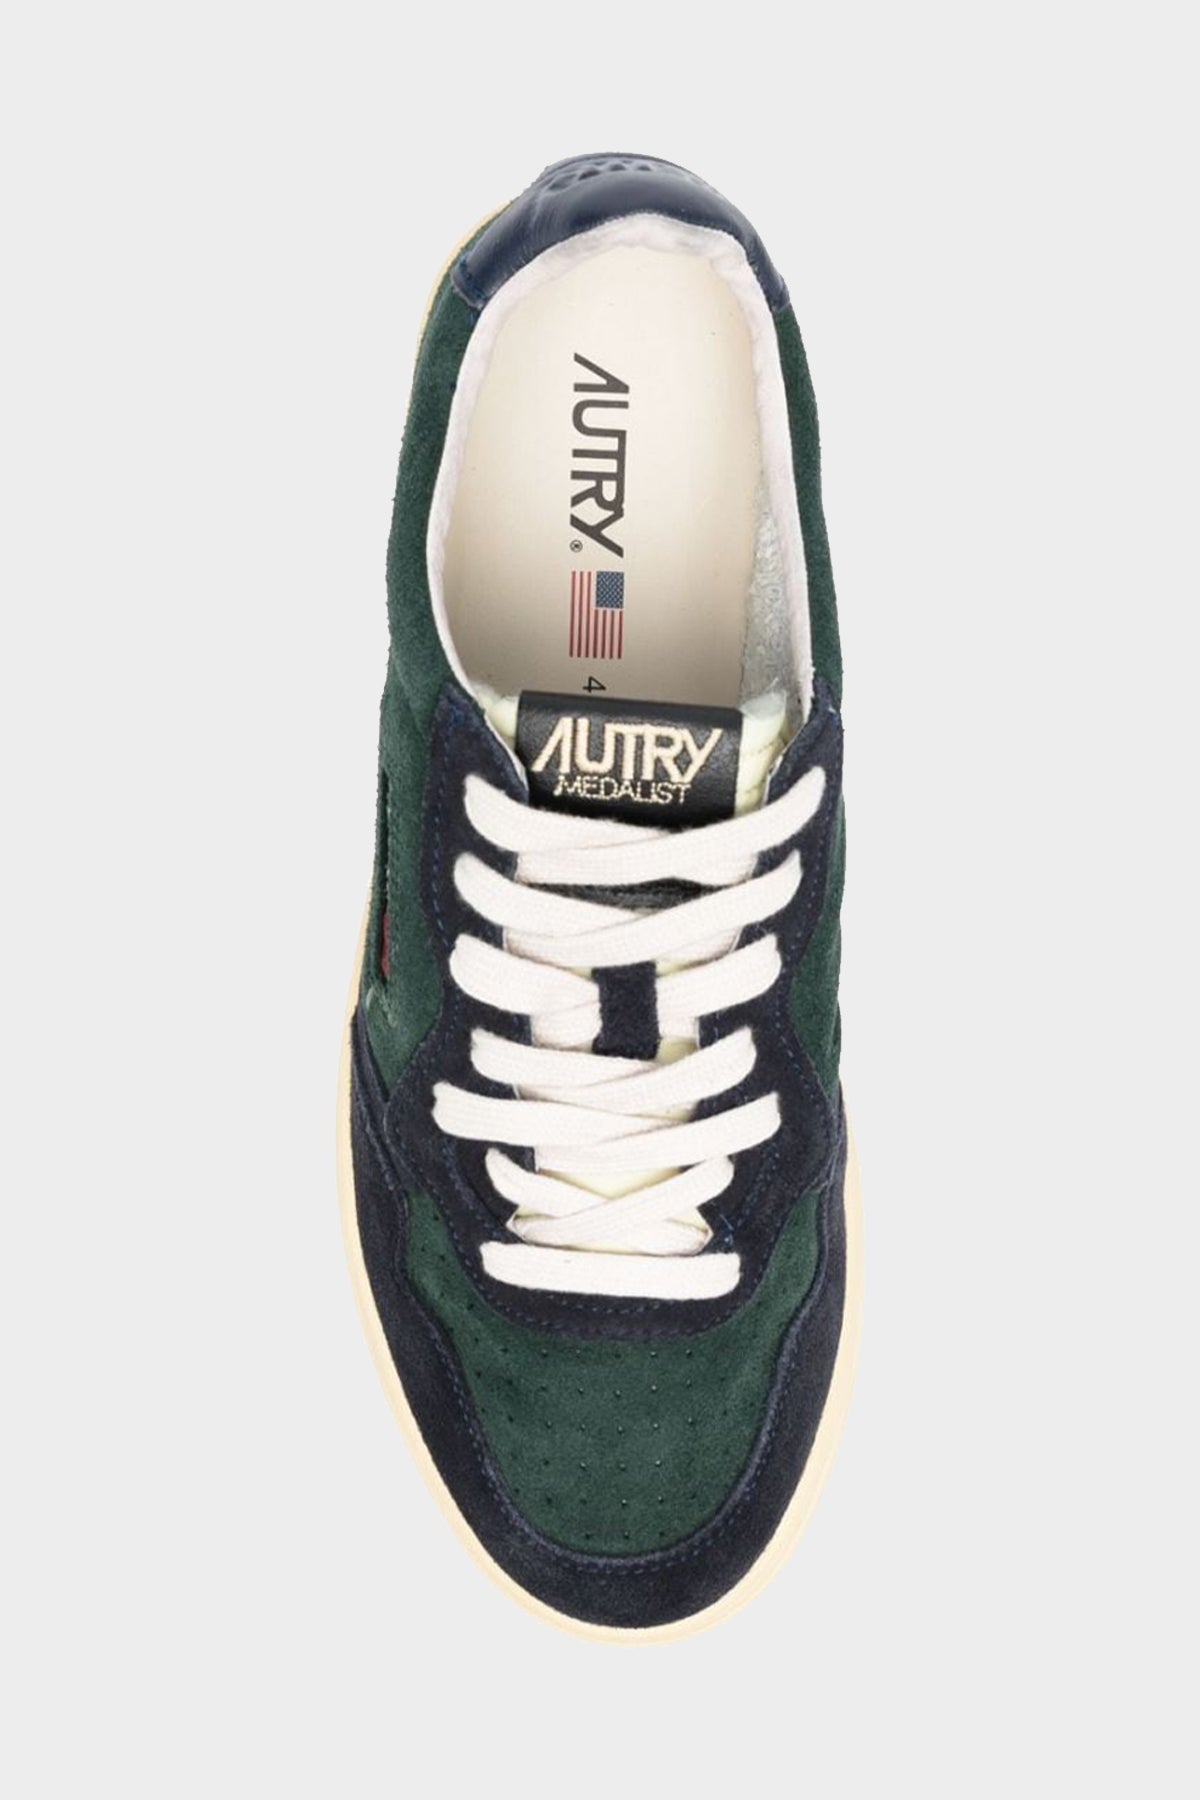 Medalist Low Suede Leather Men Sneaker in Green and Blue - shop-olivia.com